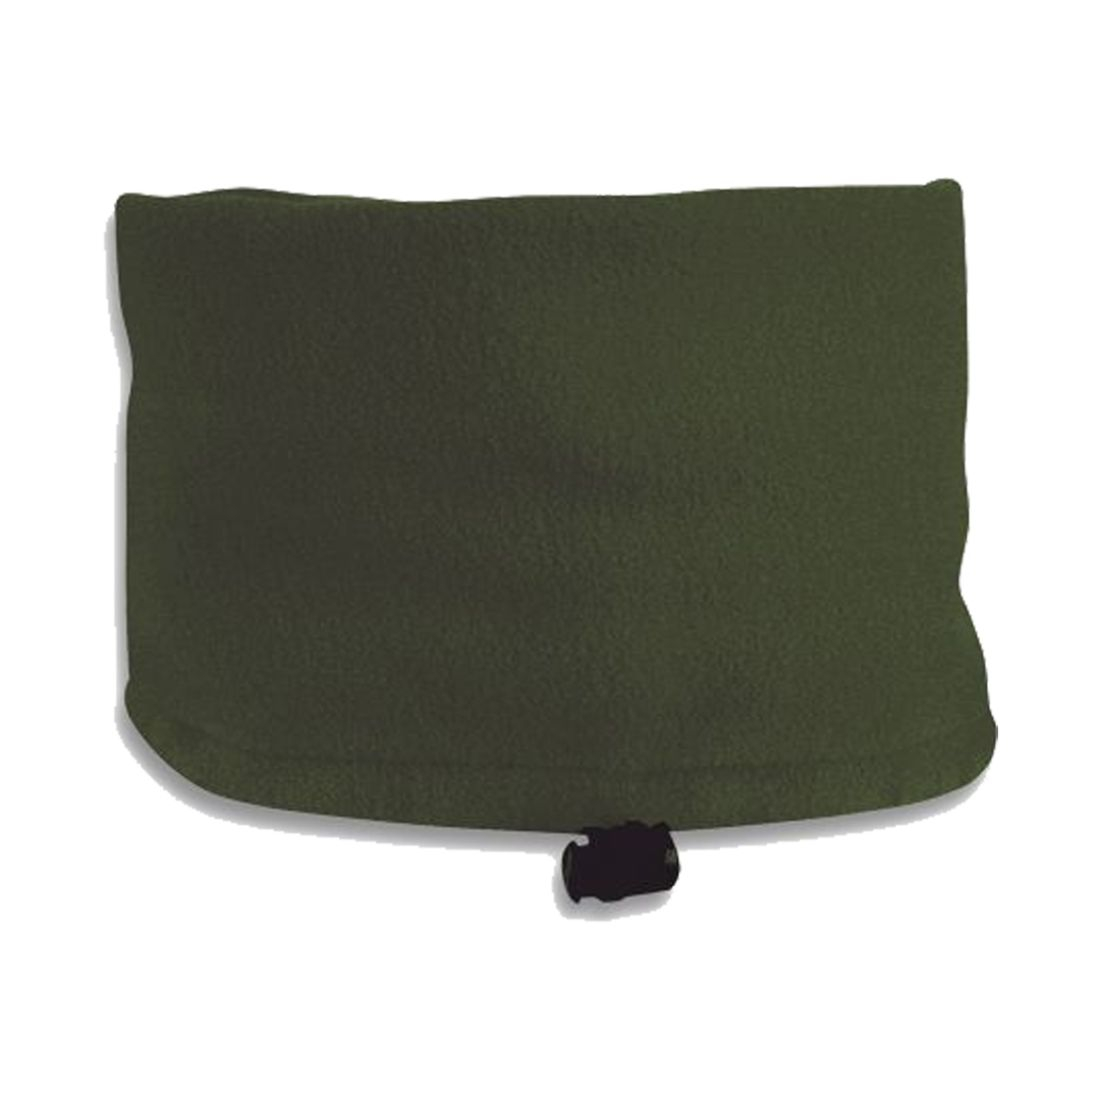 Multifunctional Fleece Scarf with Drawstring in Olive